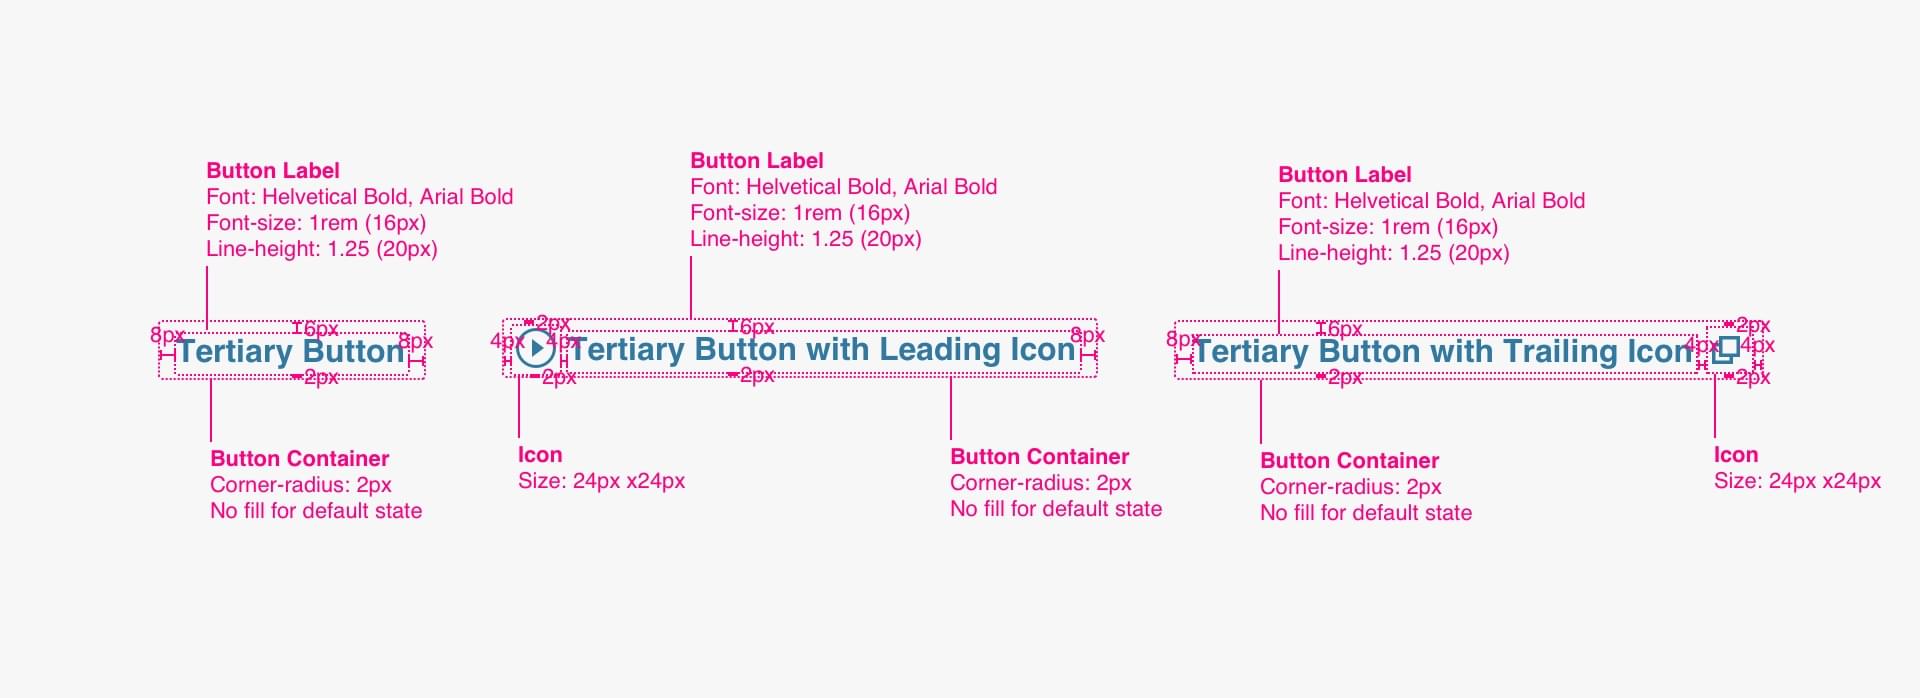 Tertiary Button Variations Specs Image